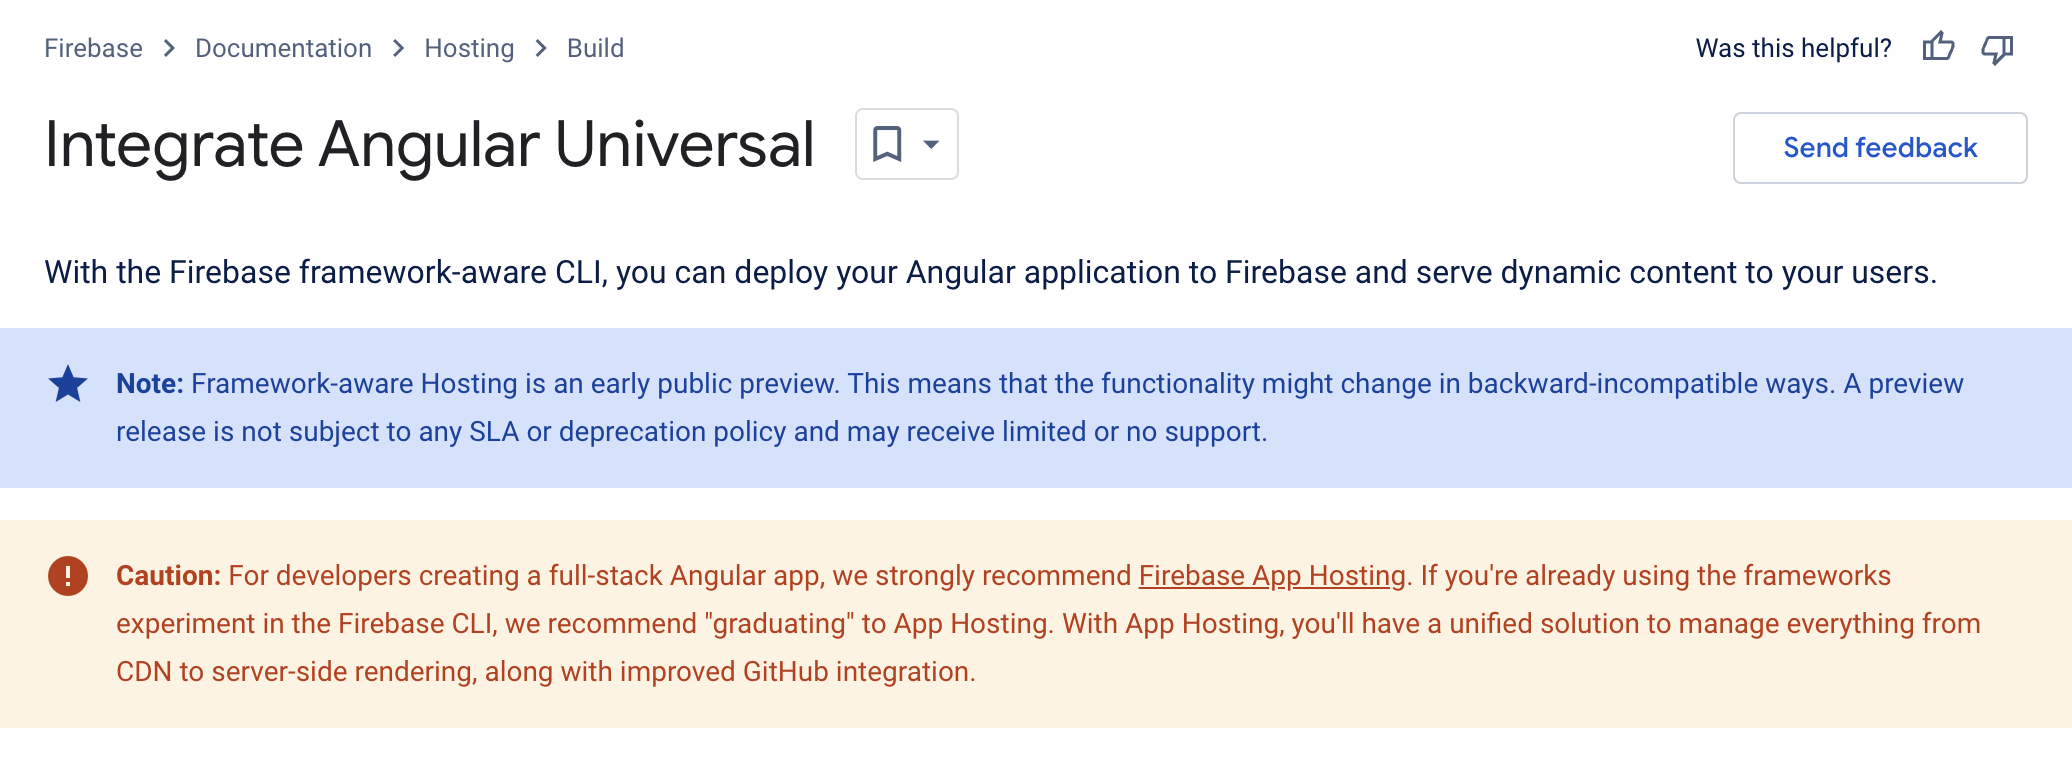 “If you're already using the frameworks experiment in the Firebase CLI, we recommend "graduating" to App Hosting.”